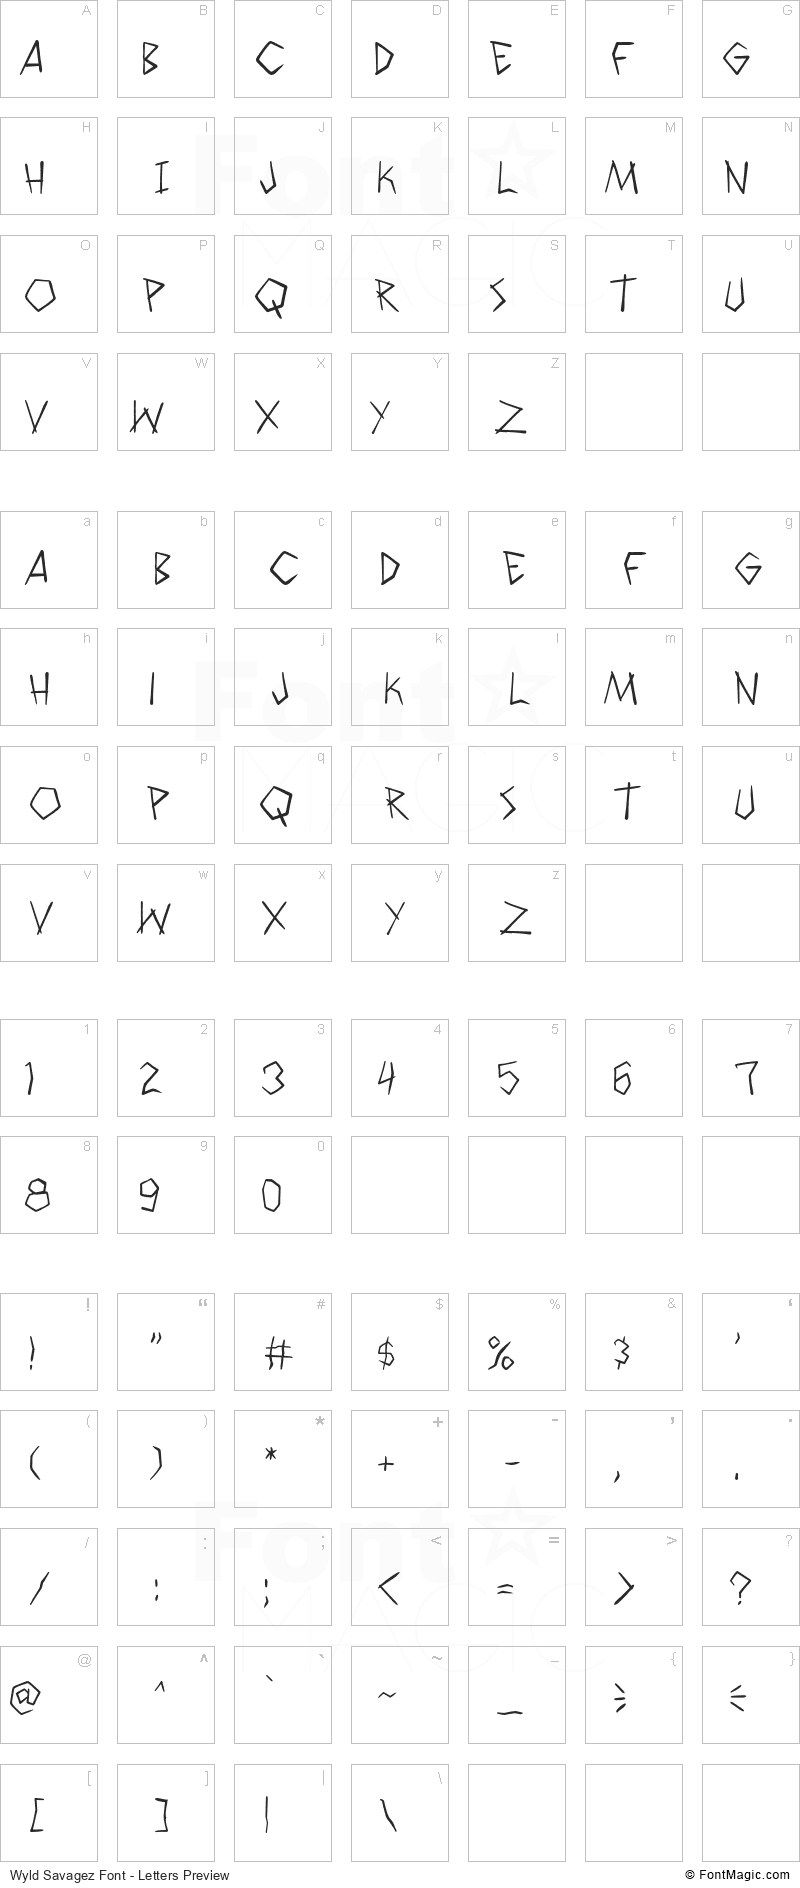 Wyld Savagez Font - All Latters Preview Chart